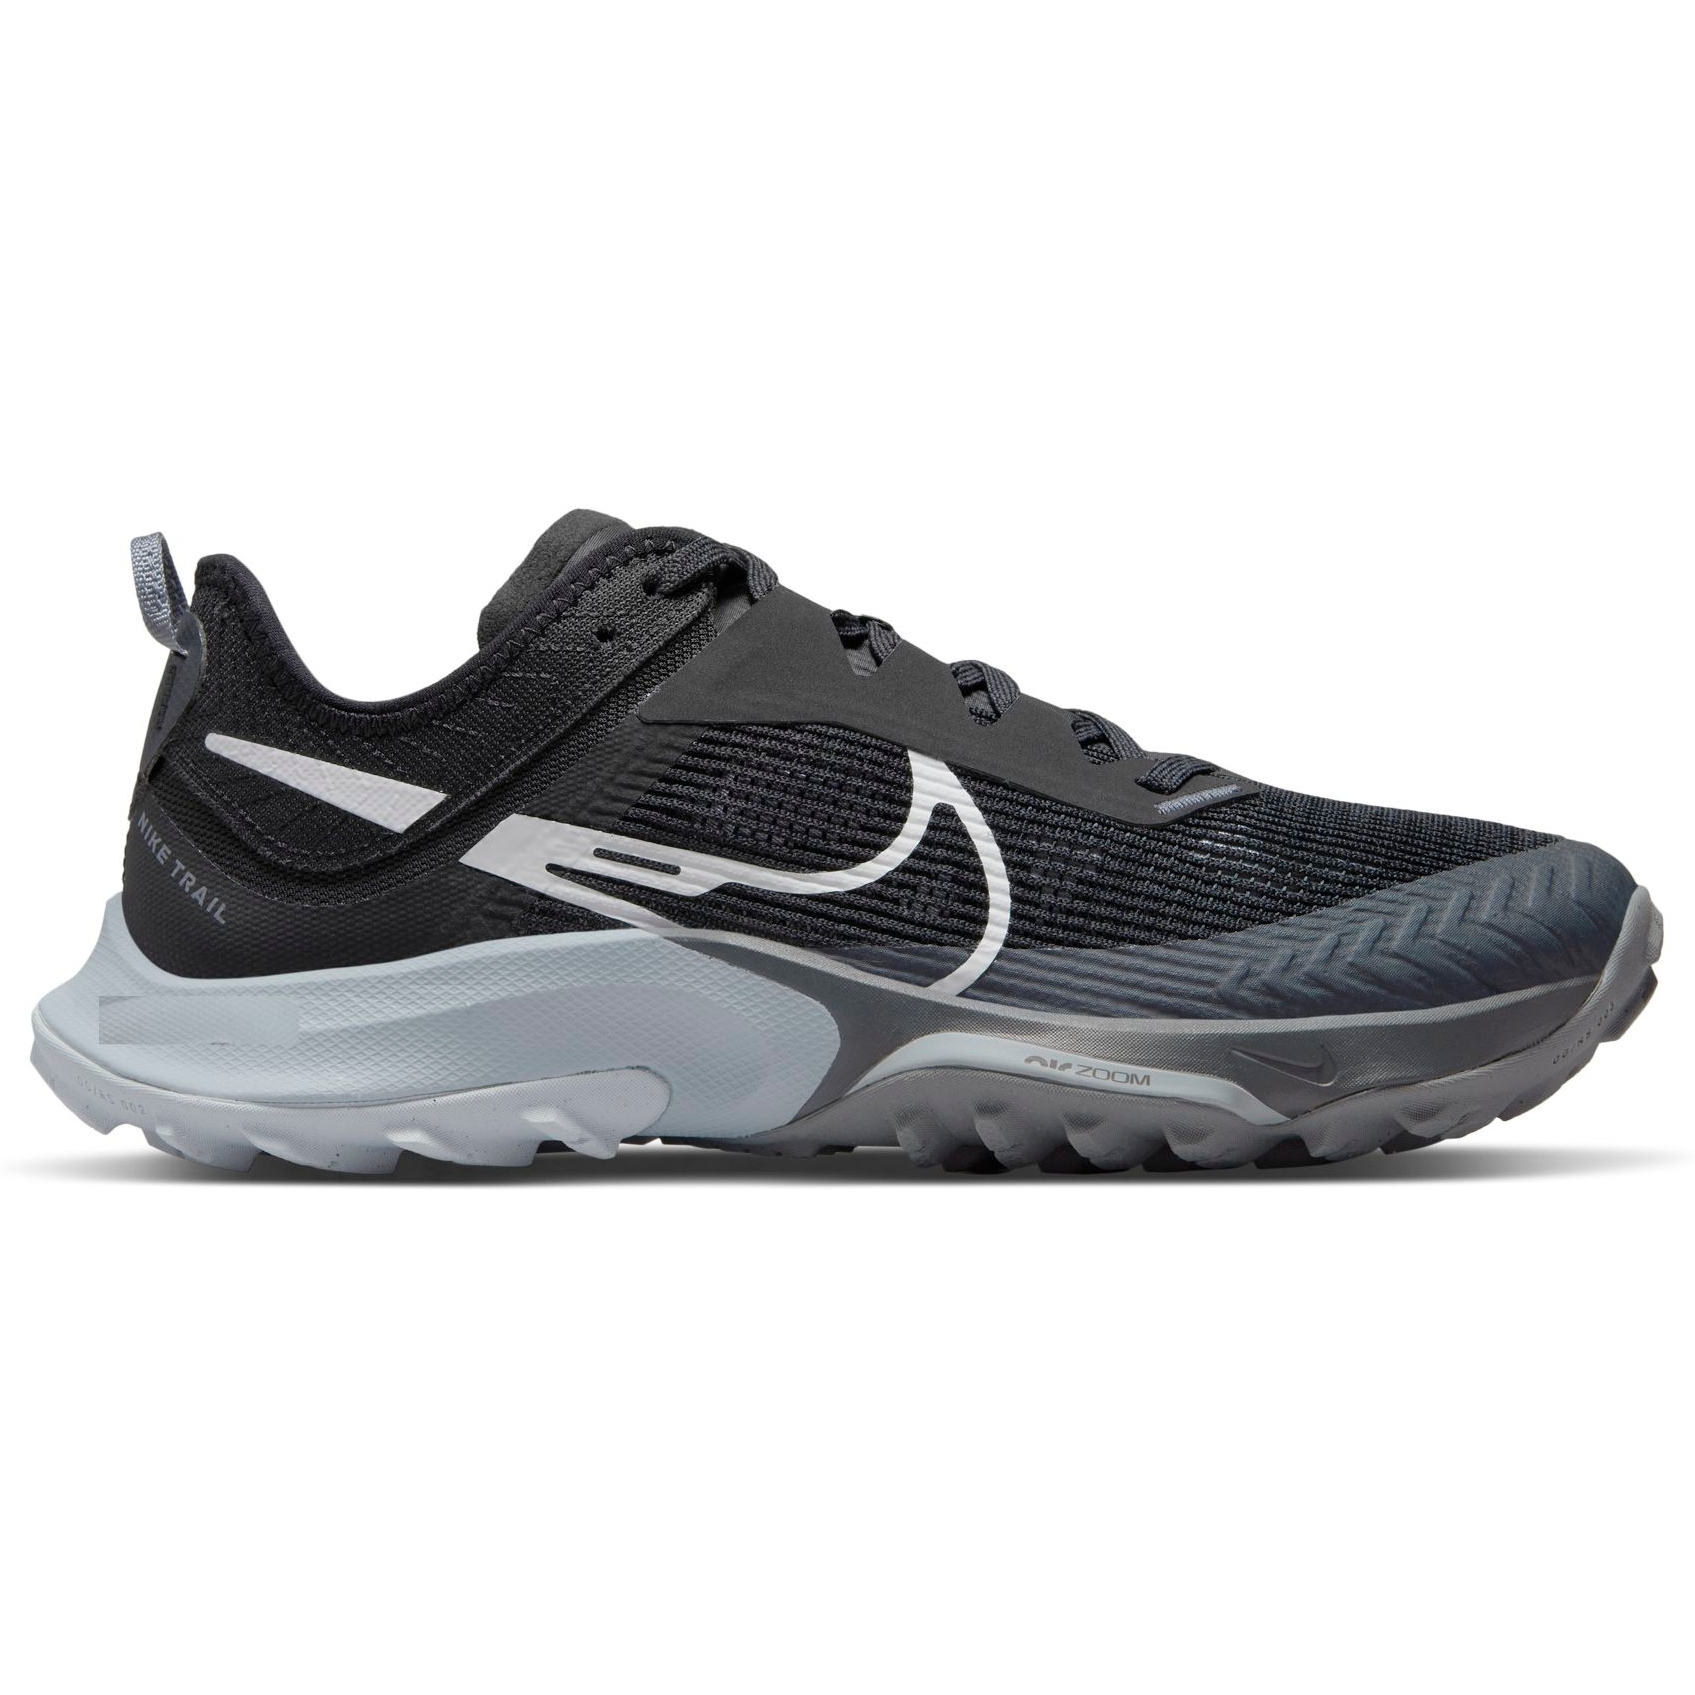 Image of Nike Air Zoom Terra Kiger 8 Women's Trail Running Shoe - black/pure platinum-anthracite-wolf grey DH0654-001